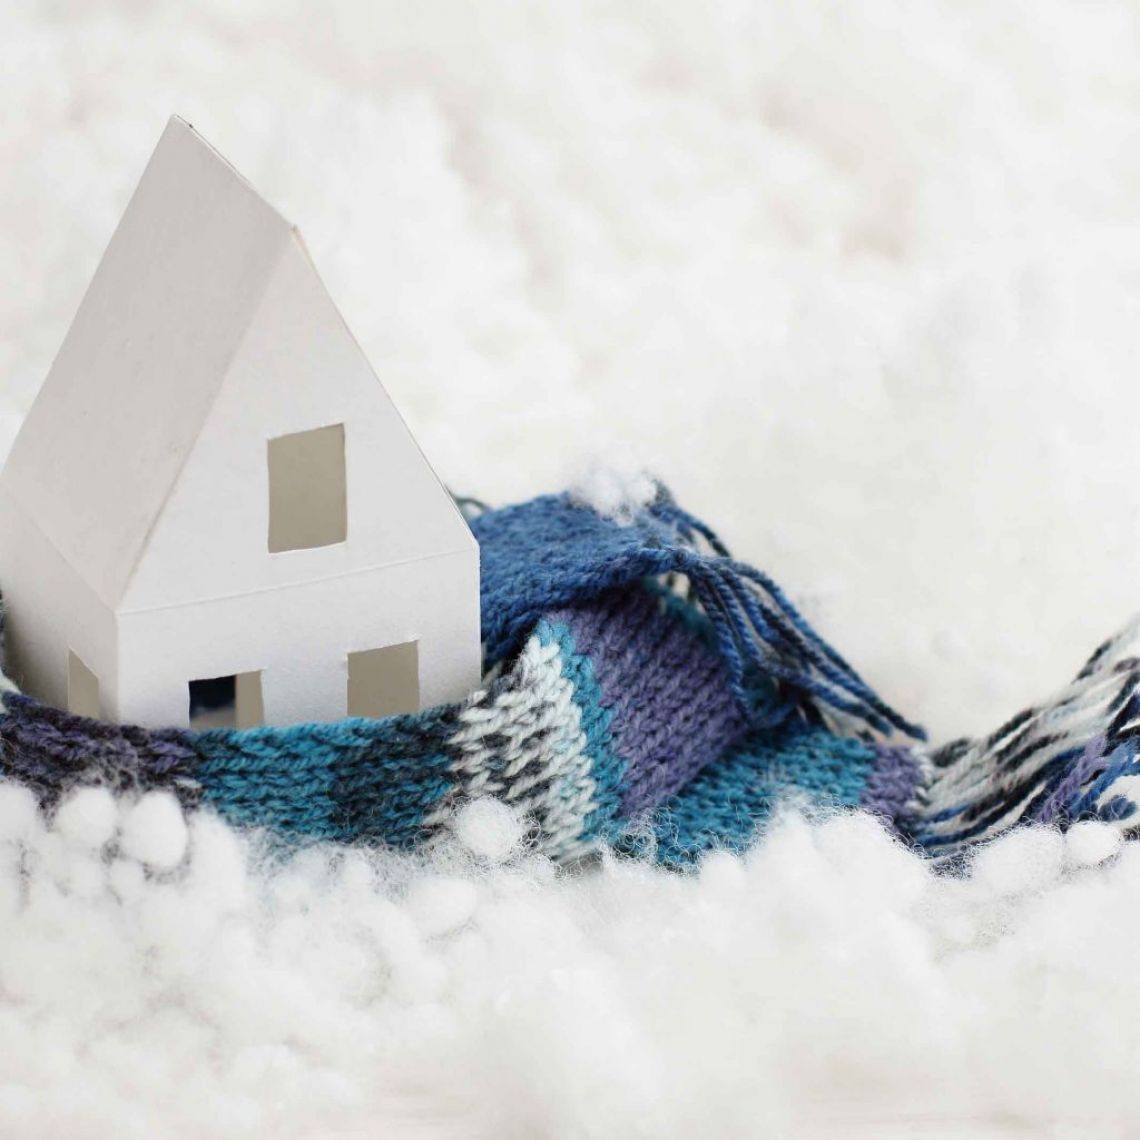 How to prepare your property for cold weather